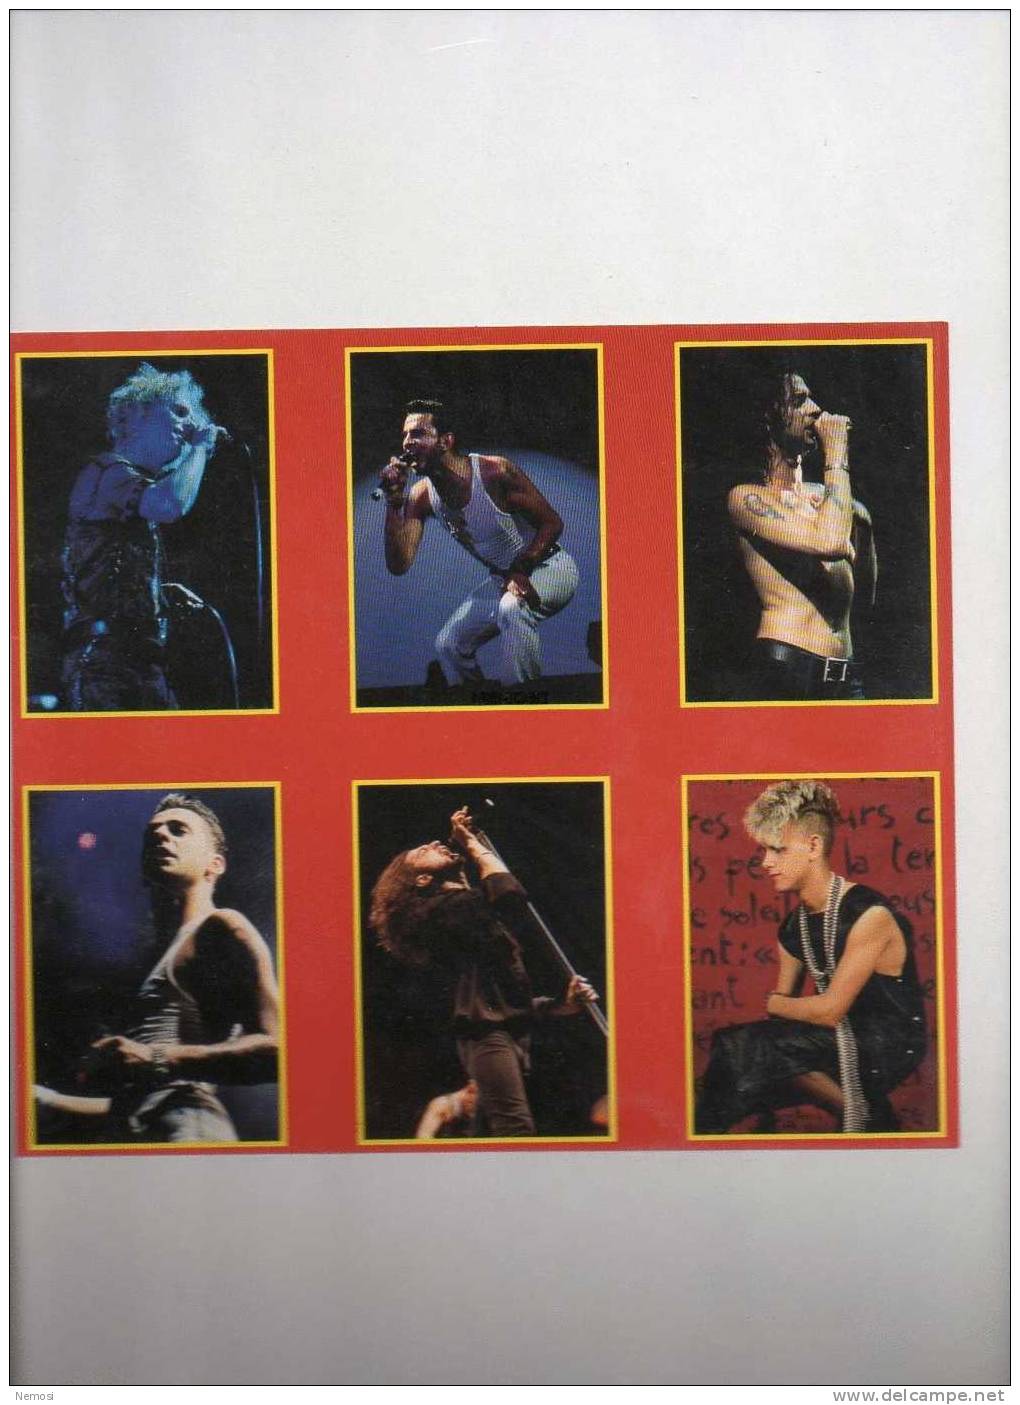 POSTERS - DEPECHE MODE - 6 Stunning Posters - Andere Producten